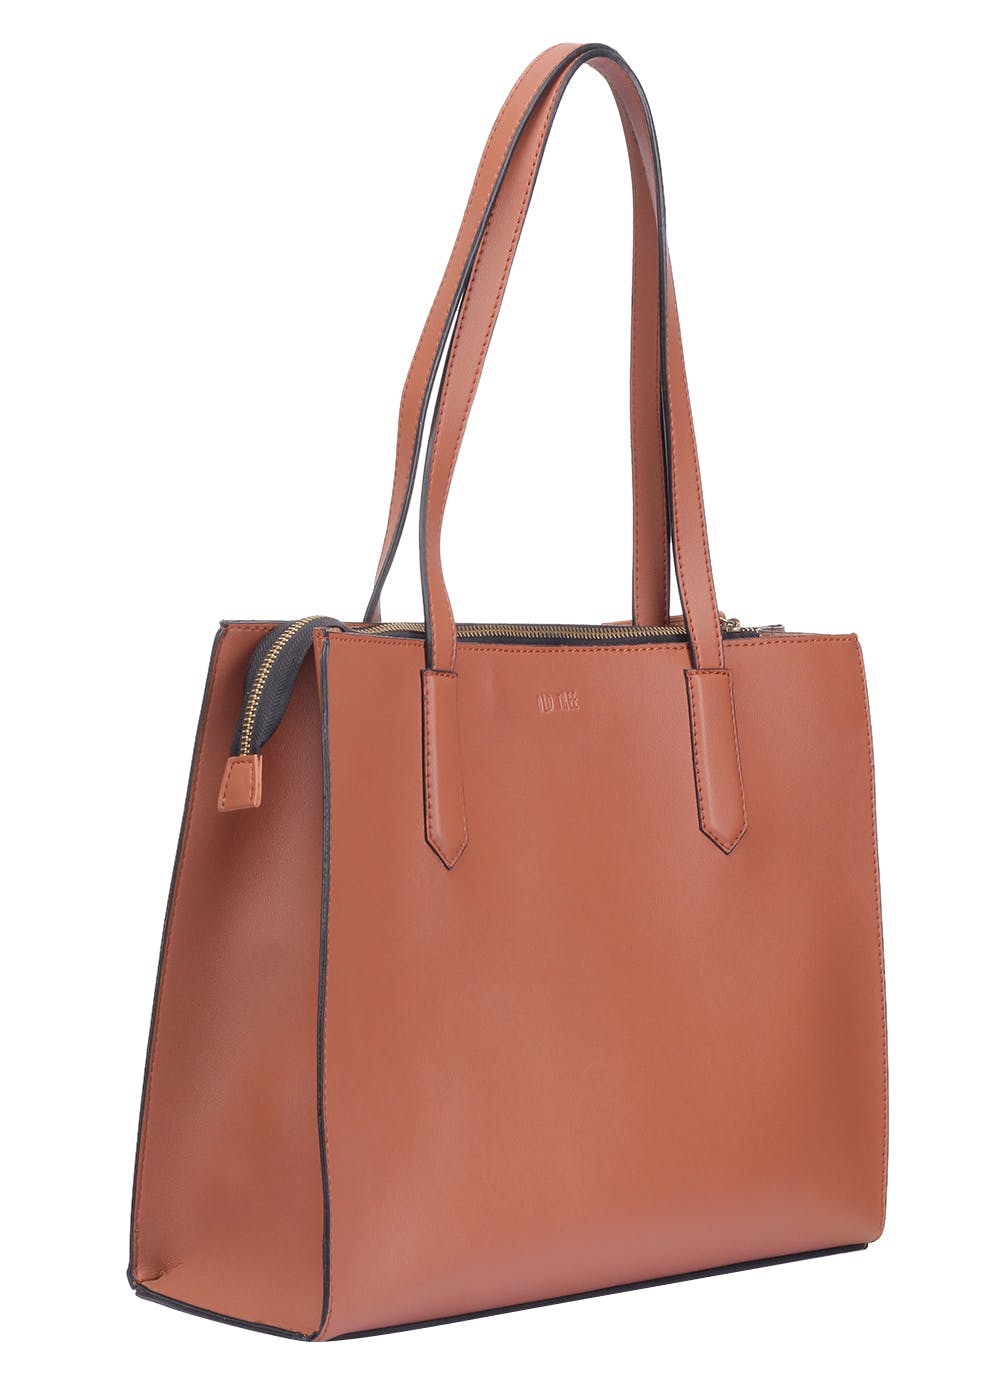 22 Tote Zip Top Tote Bag Women's Fashion Top Handle Tote Bag Casual Shoulder Bag (Camel), Size: One size, Brown